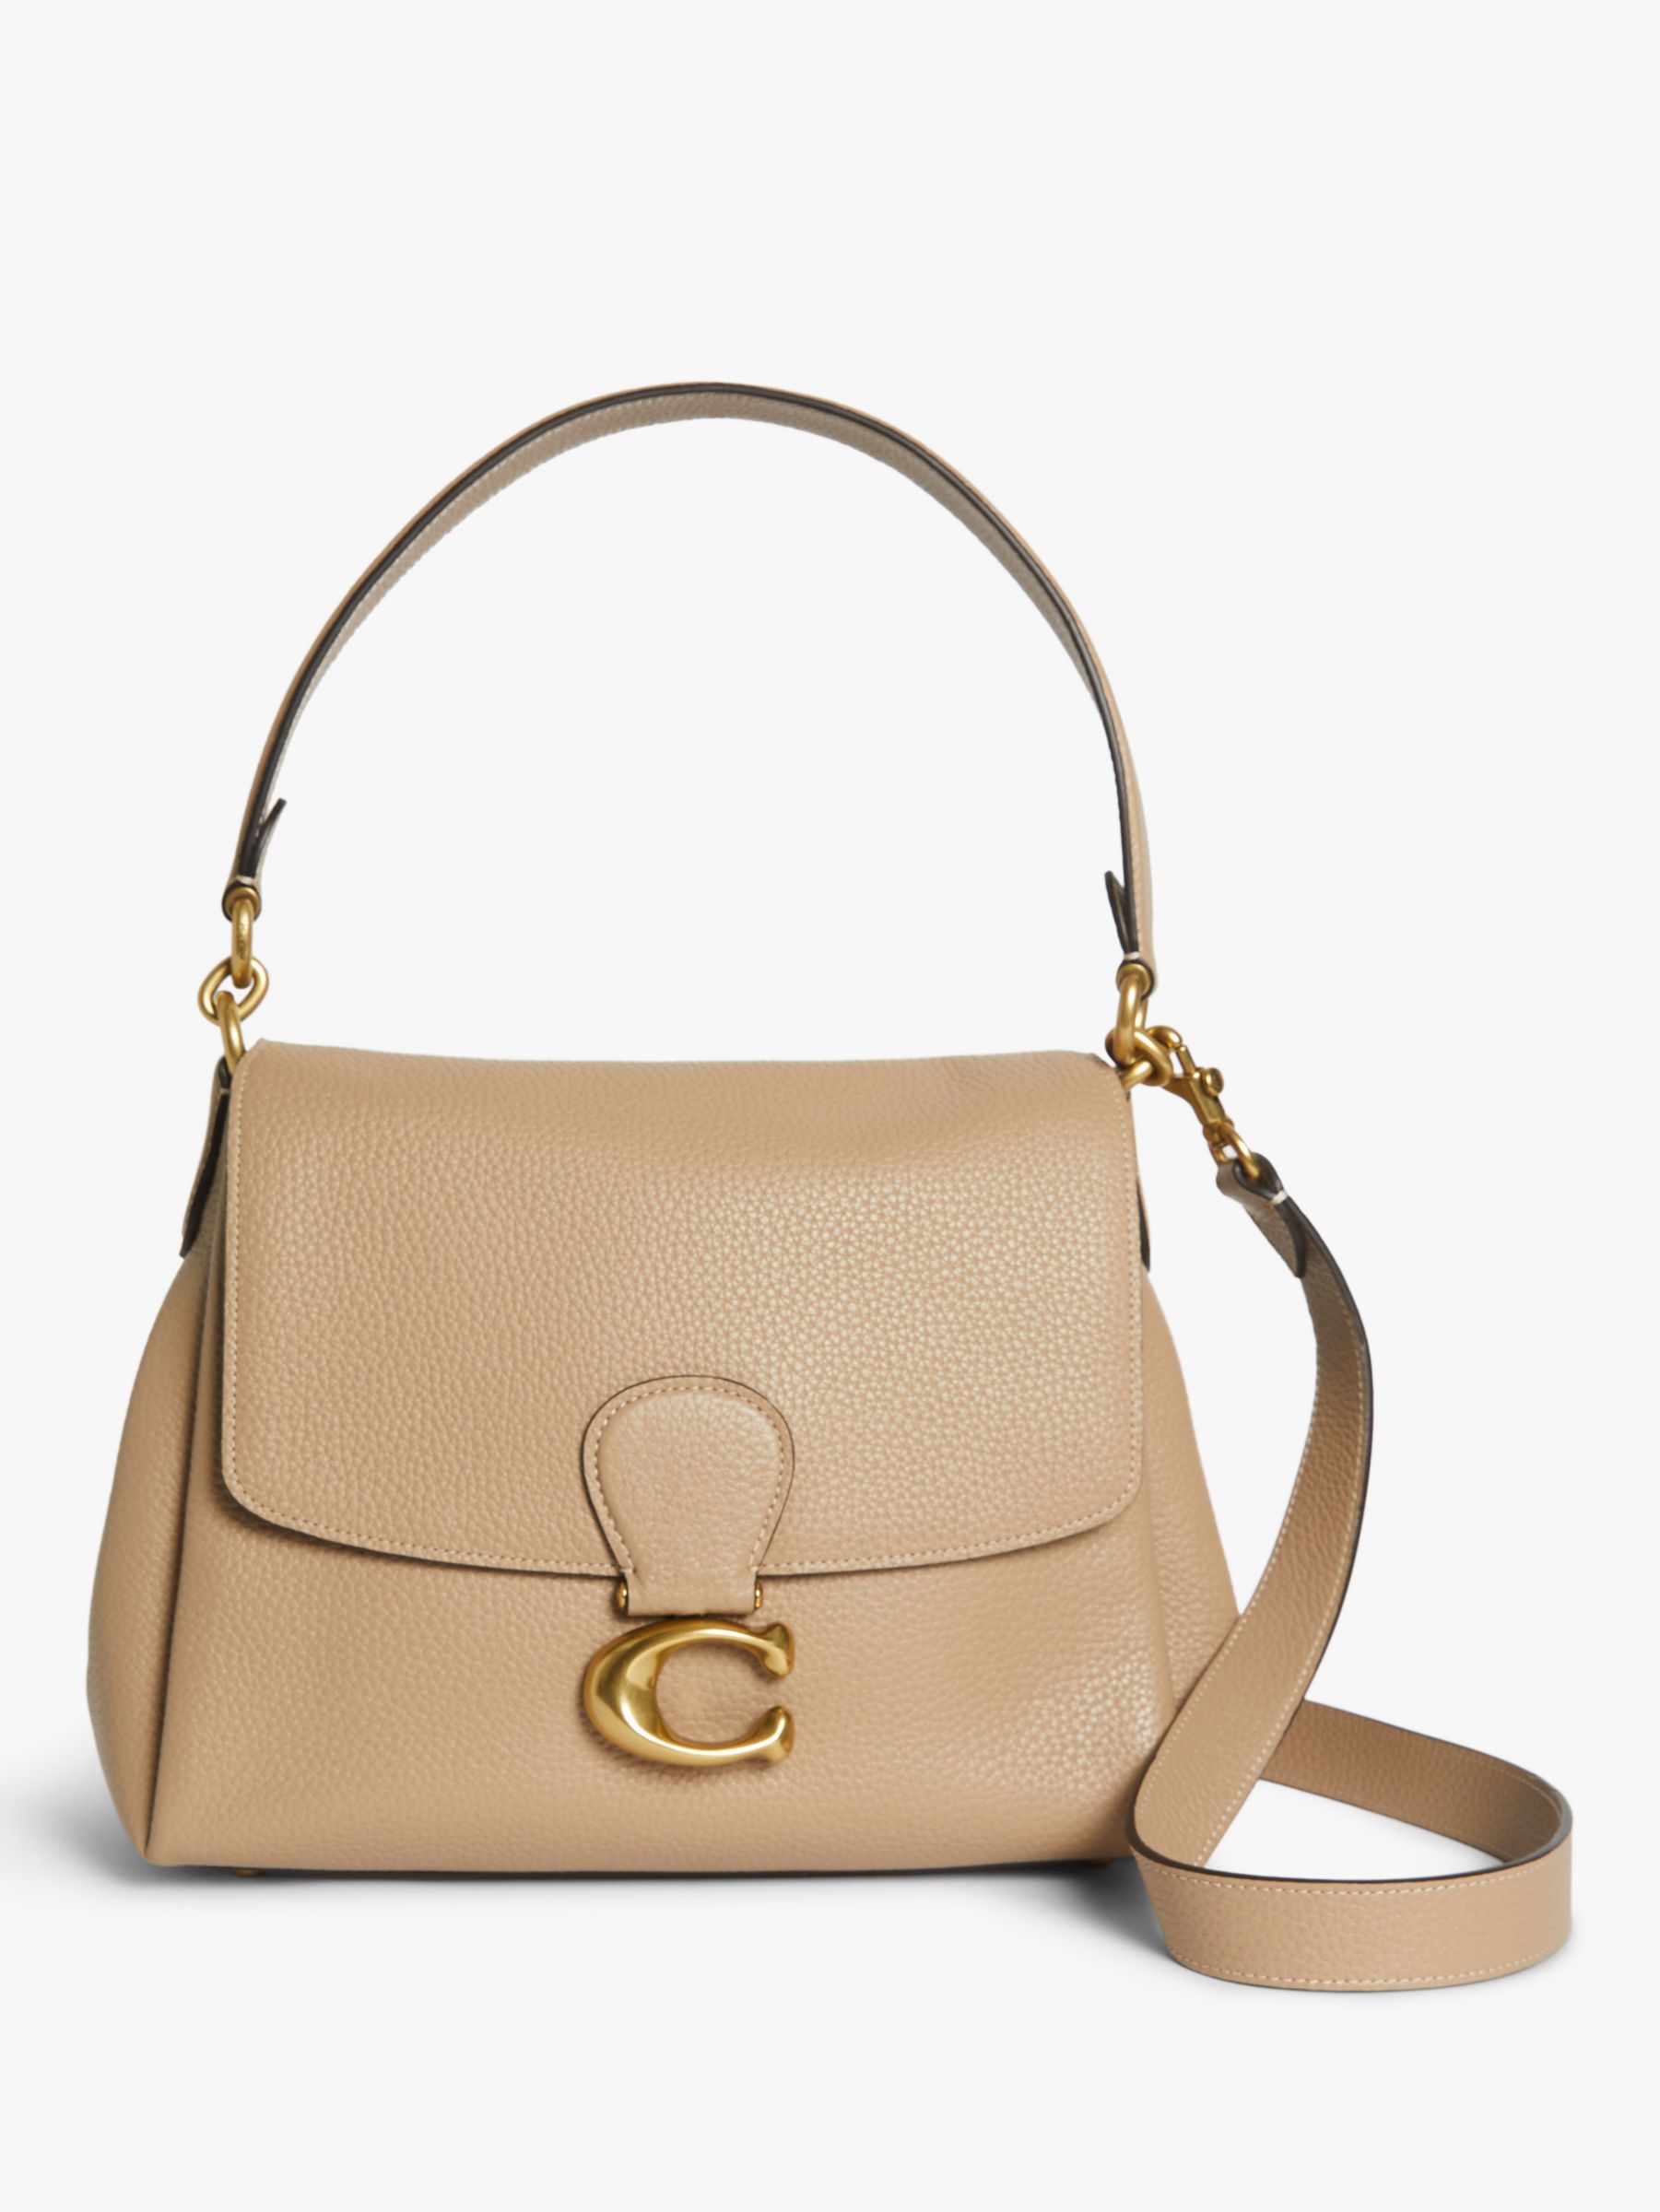 Coach May Leather Shoulder Bag, Taupe at John Lewis & Partners